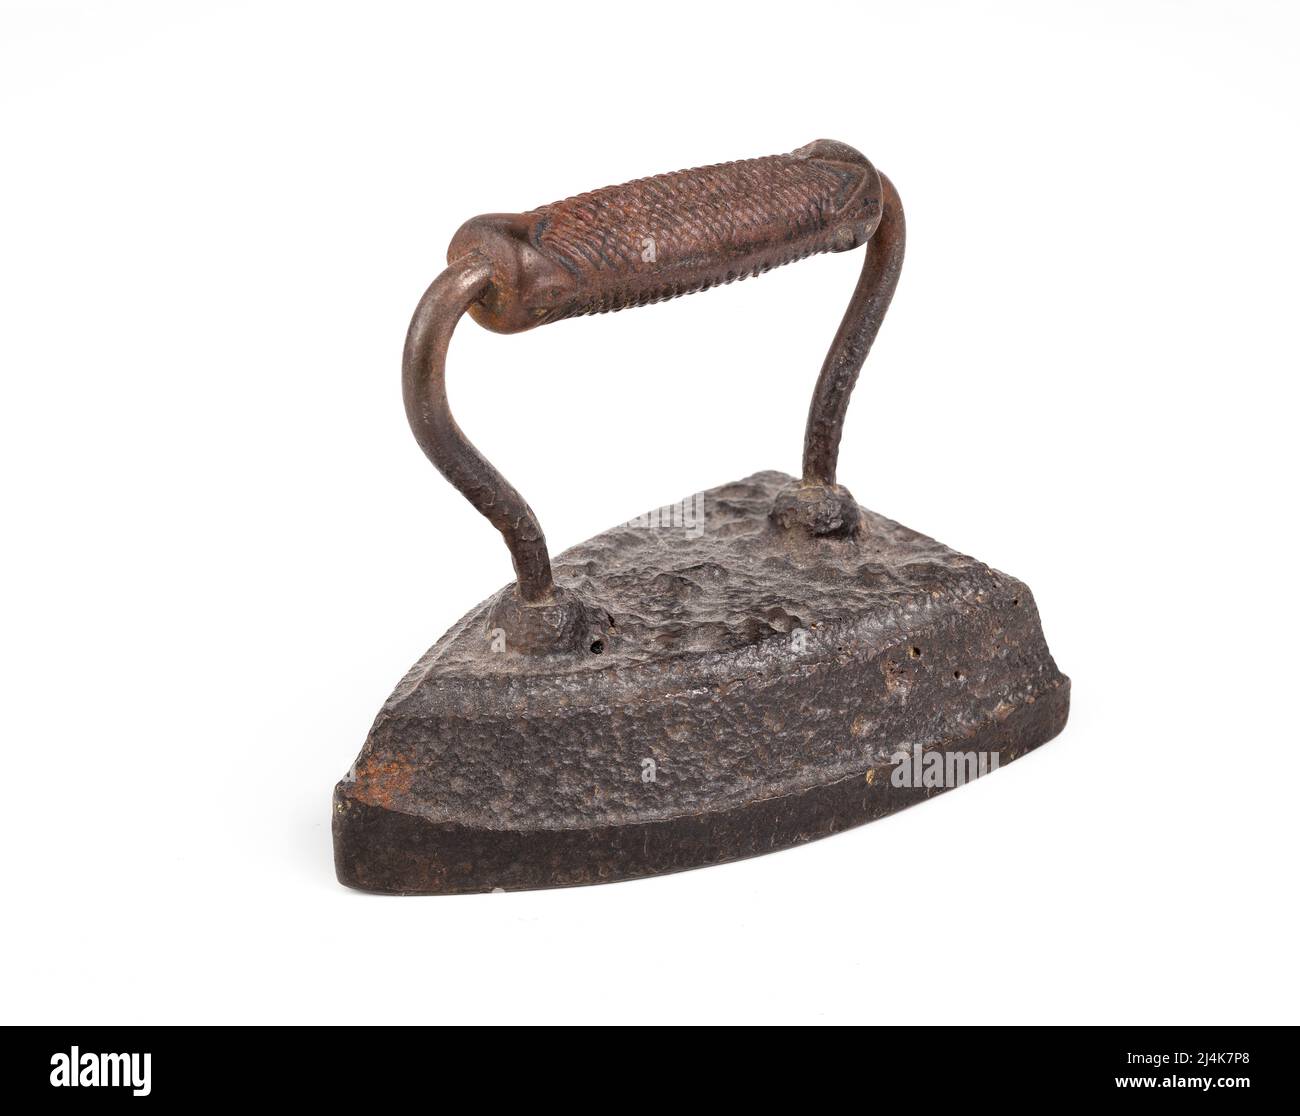 Isolated antique flat iron, perspective view. Vintage flat iron or sad iron made of cast iron with handle. Heated up in can be used to press cloth Stock Photo